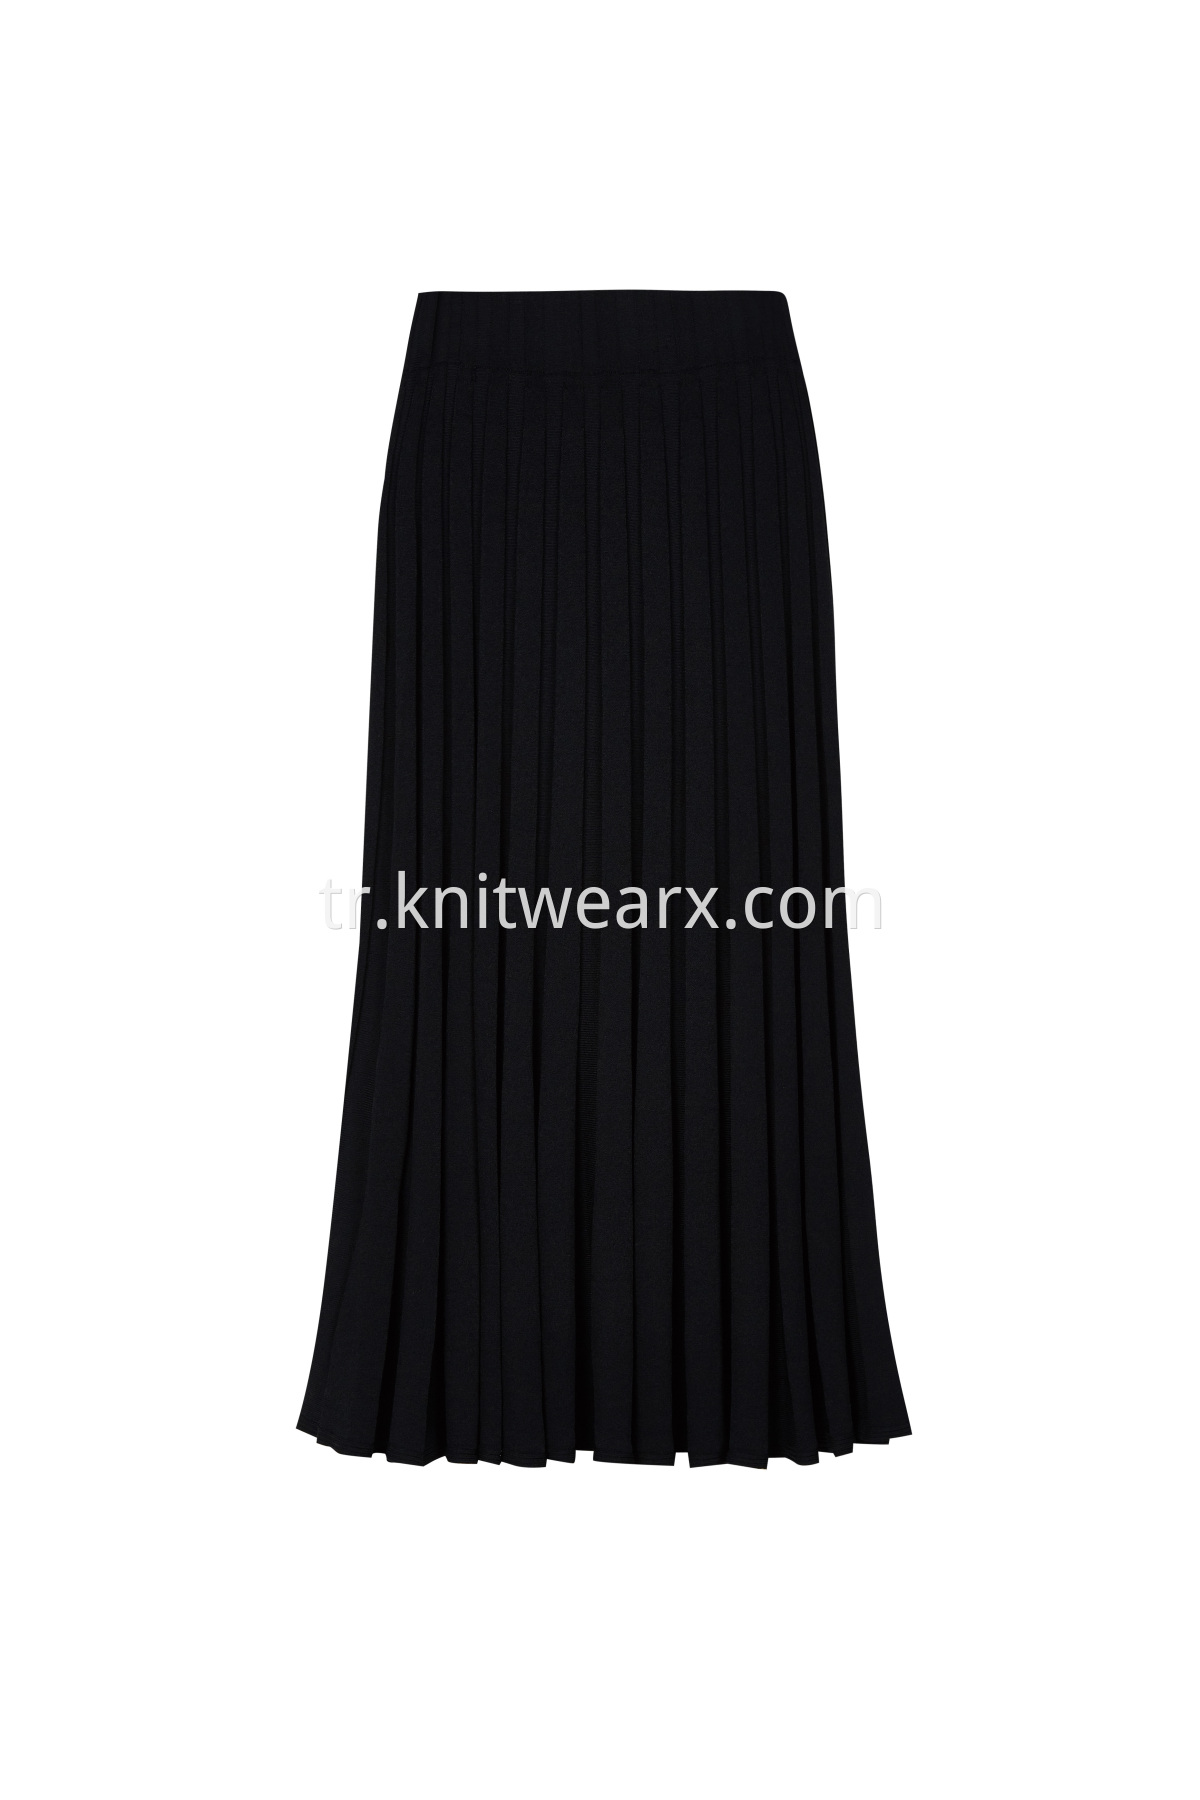 Women's Winter Stretchy Waist Knitted Pleated Skirt